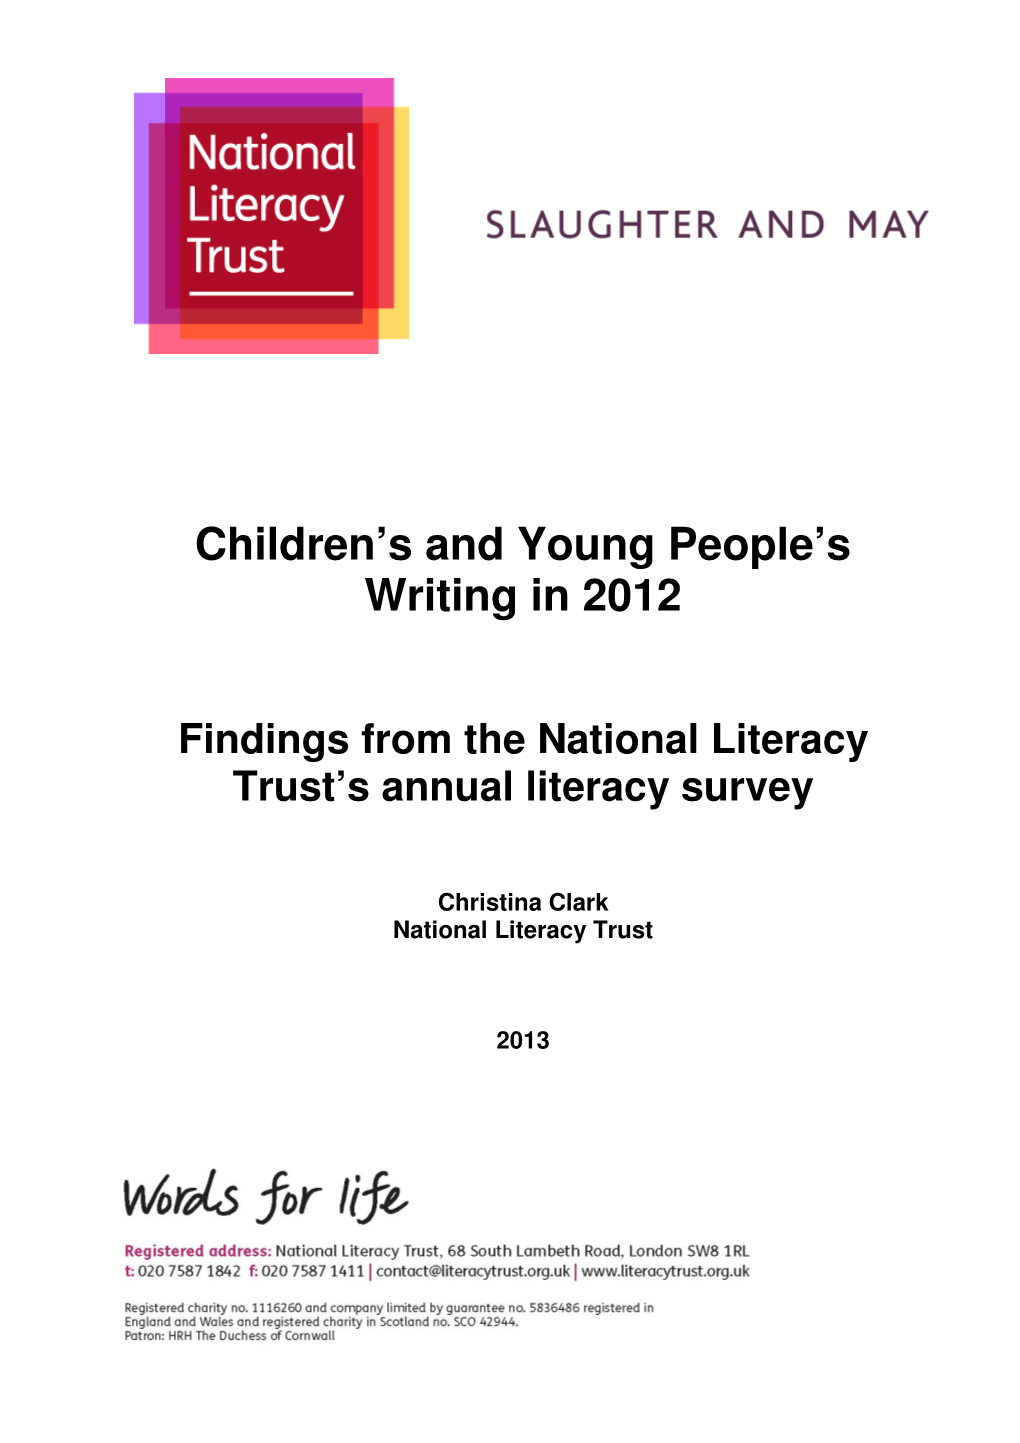 Children's and Young People's Writing in 2012